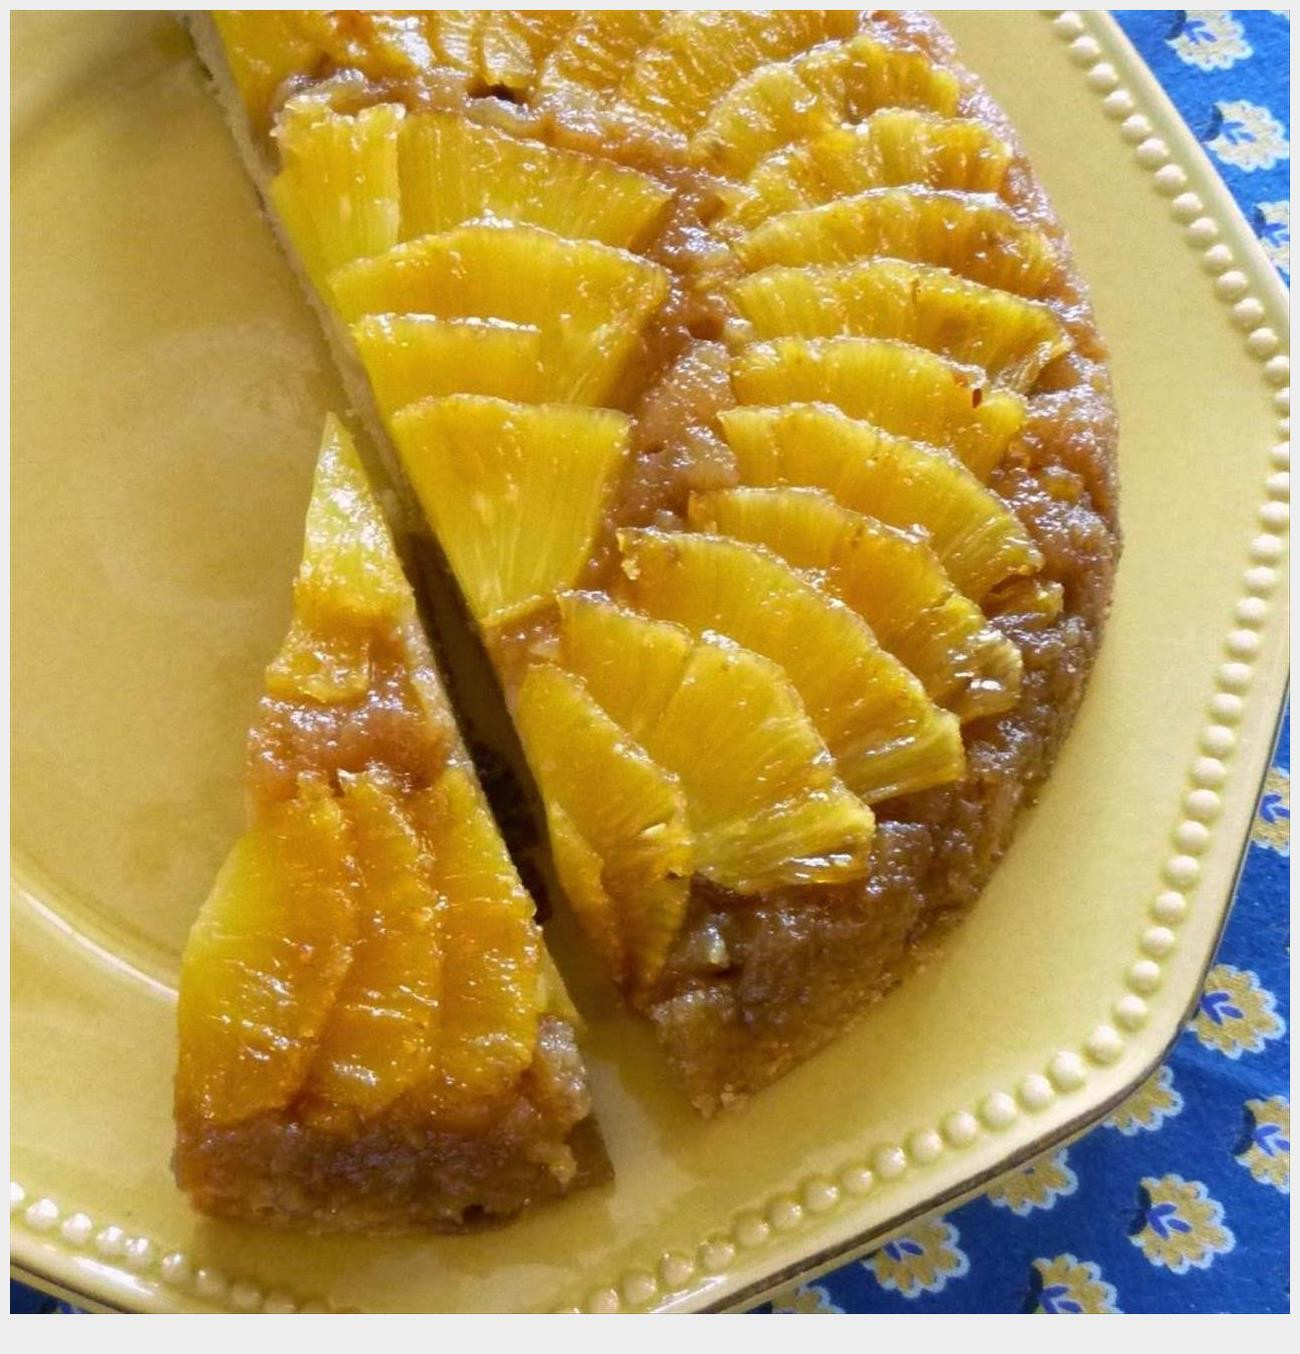 Upside Down Pineapple Cake From Scratch
 Let’s Make a Pineapple Upside Down Cake from Scratch